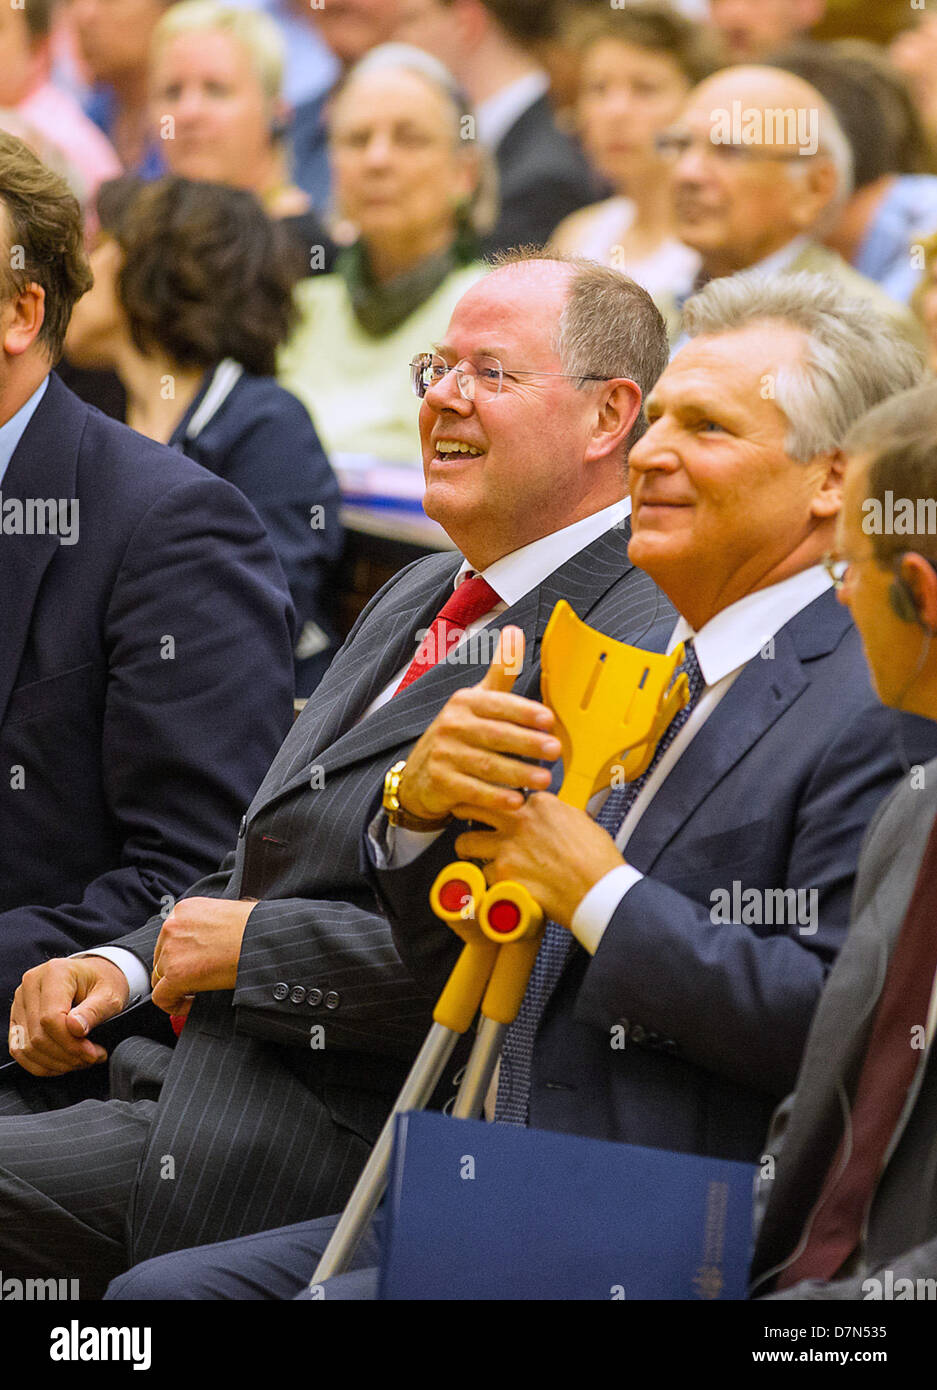 SPD chancellor candidate Peer Steinbrueck and former Polish President Aleksander Kwasniewski (R) sit during an event at the university in Warsaw, Poland, 10 May 2013. Steinbrueck traveled to Poland for political talks. Photo: Hannibal Stock Photo